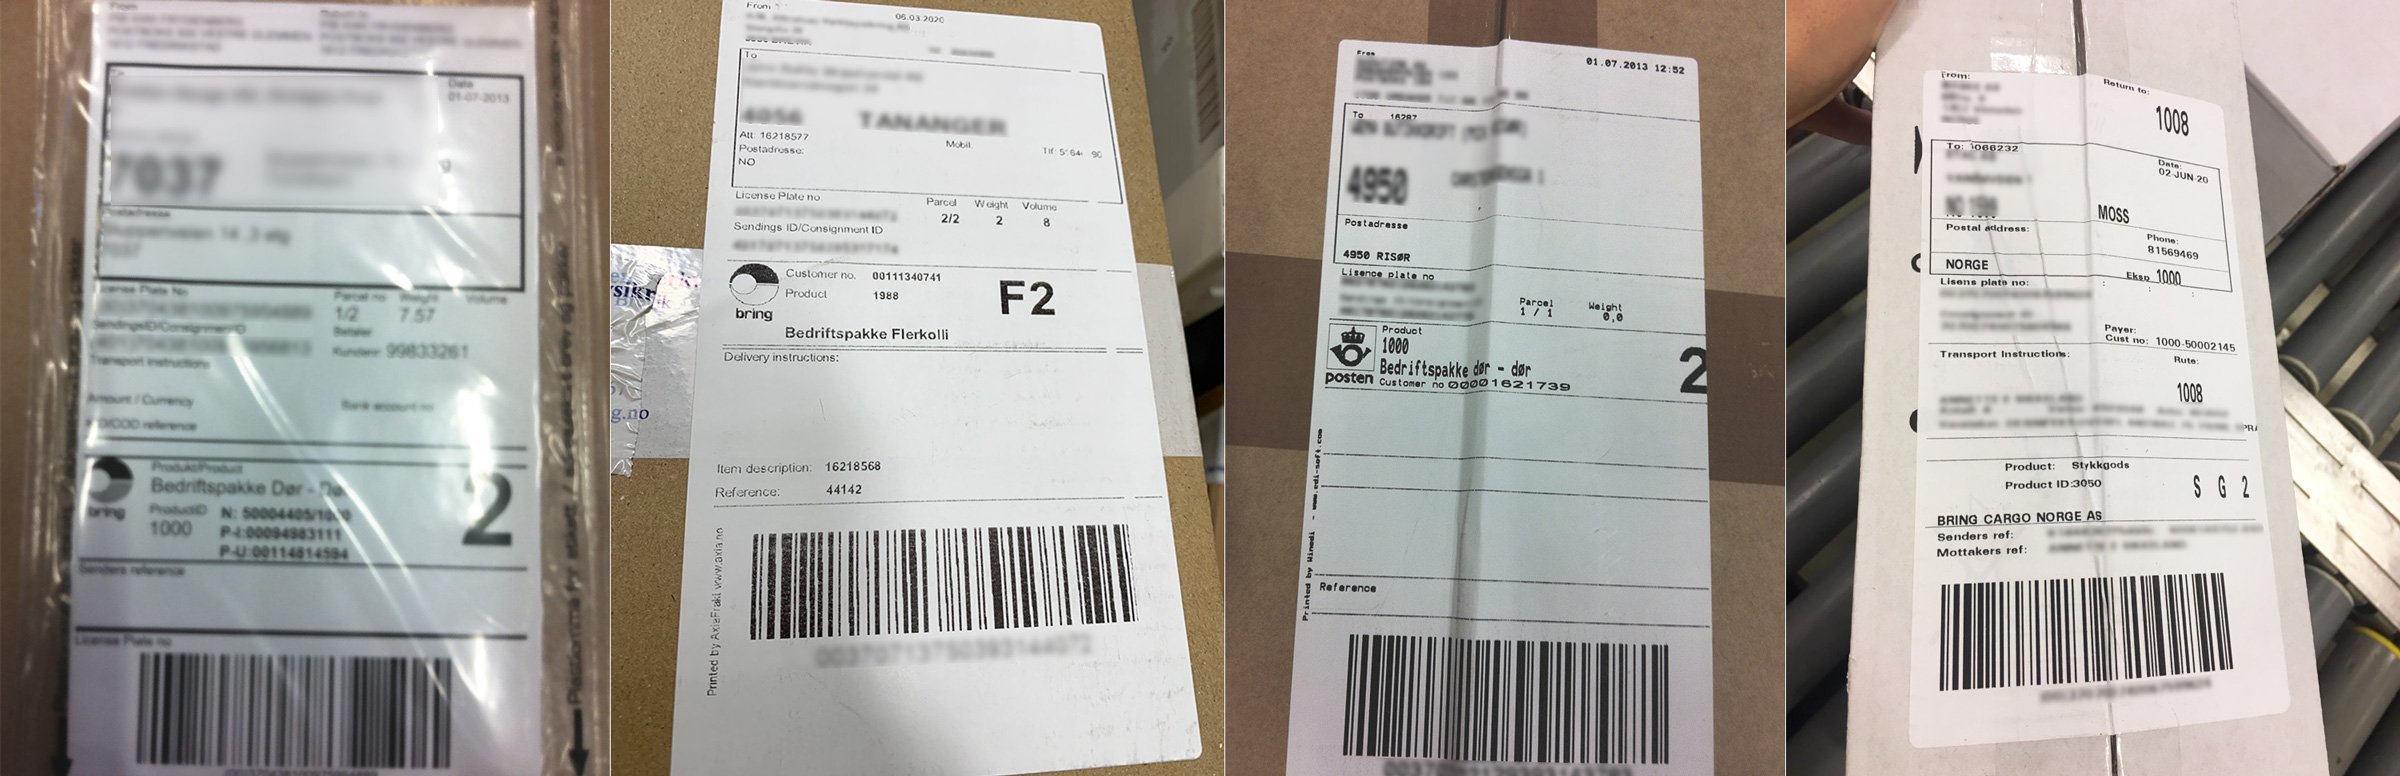 Image of parcels with different barcode labels